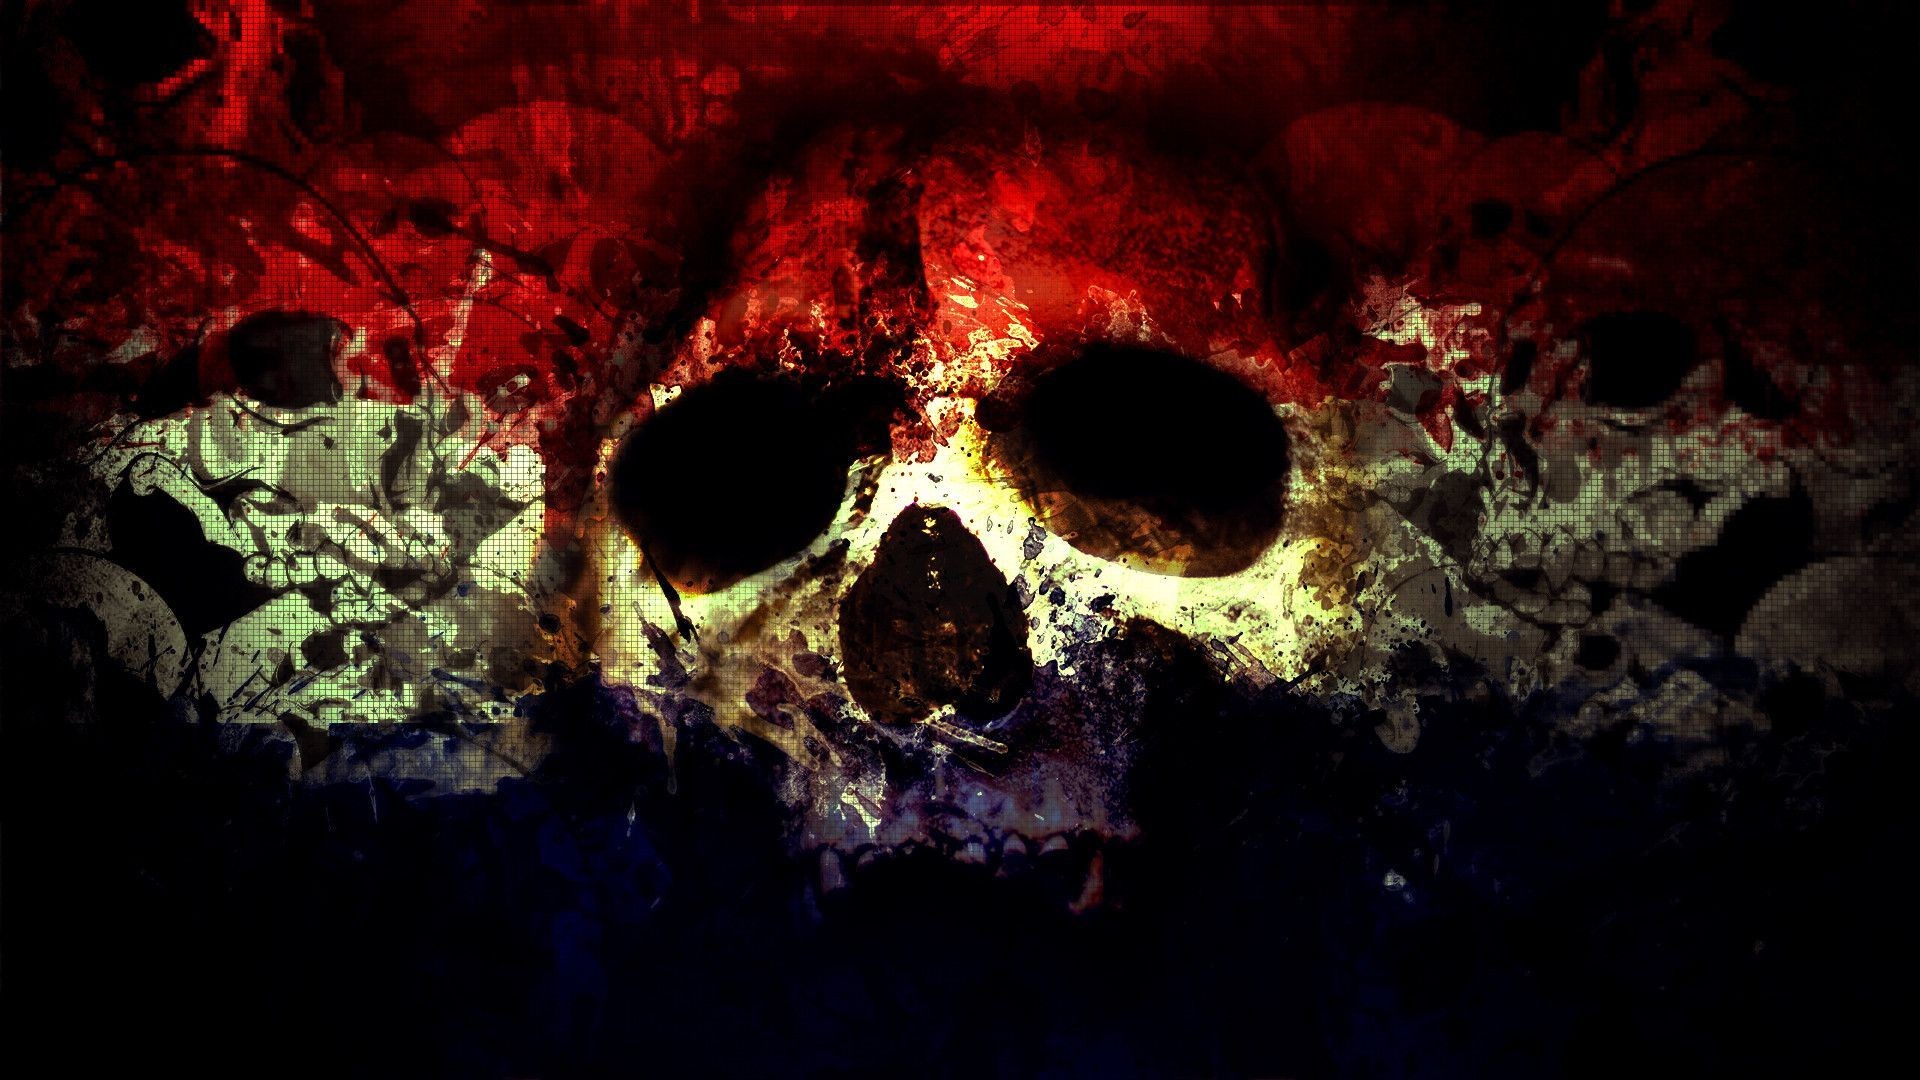 1920x1080 Ultra HD Skull 4K Backgrounds for PC & Mac, Laptop, Tablet, Mobile Phone